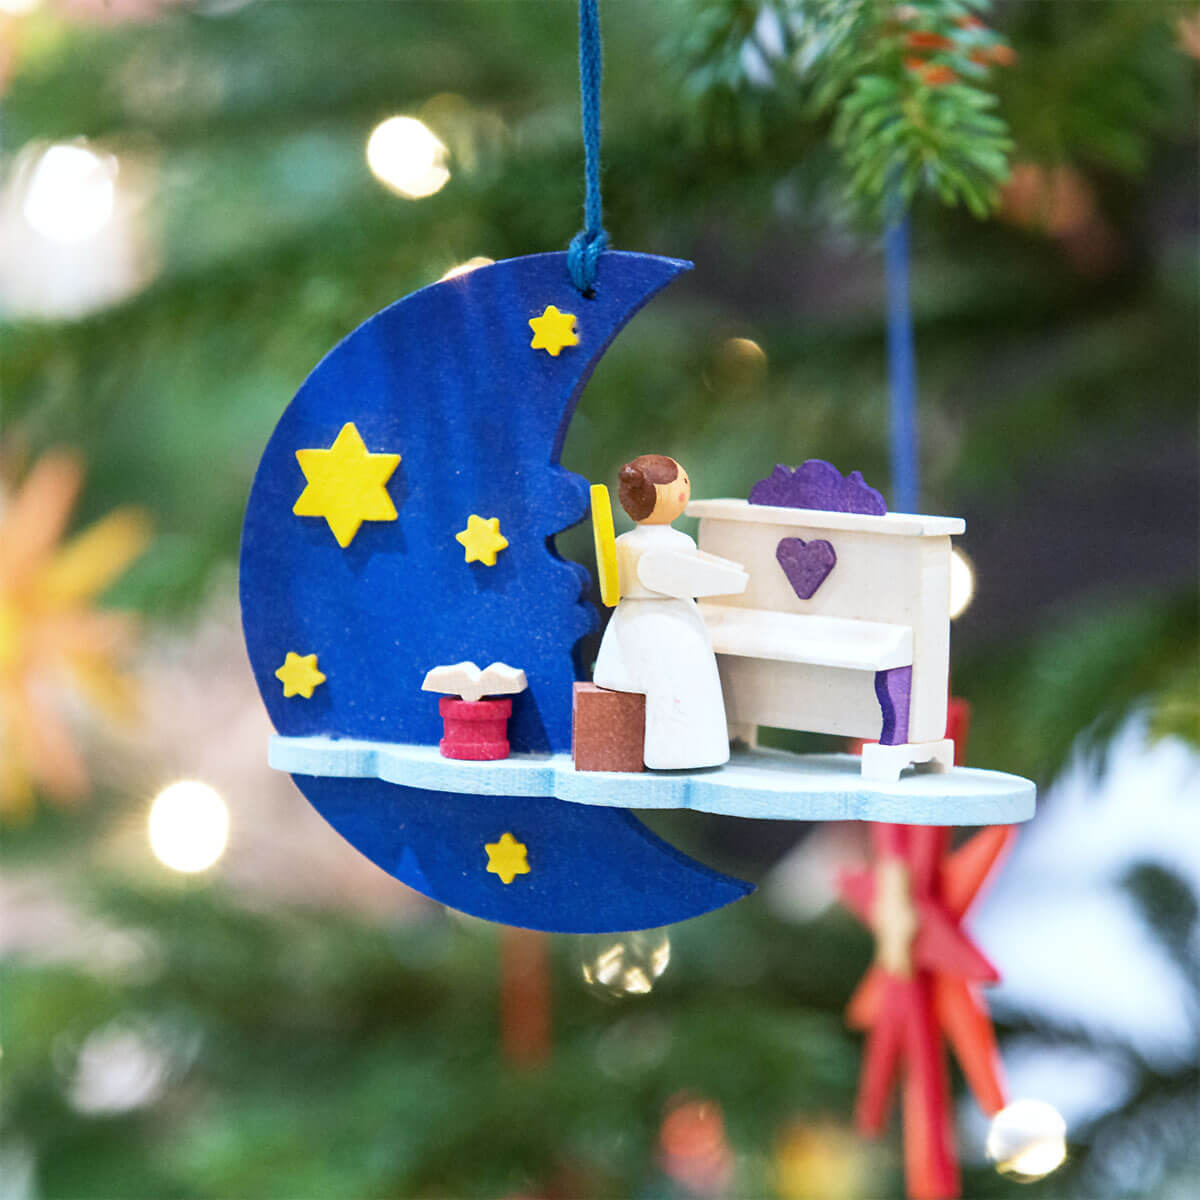 Moon & Cloud 'Angel' Ornament with cradle